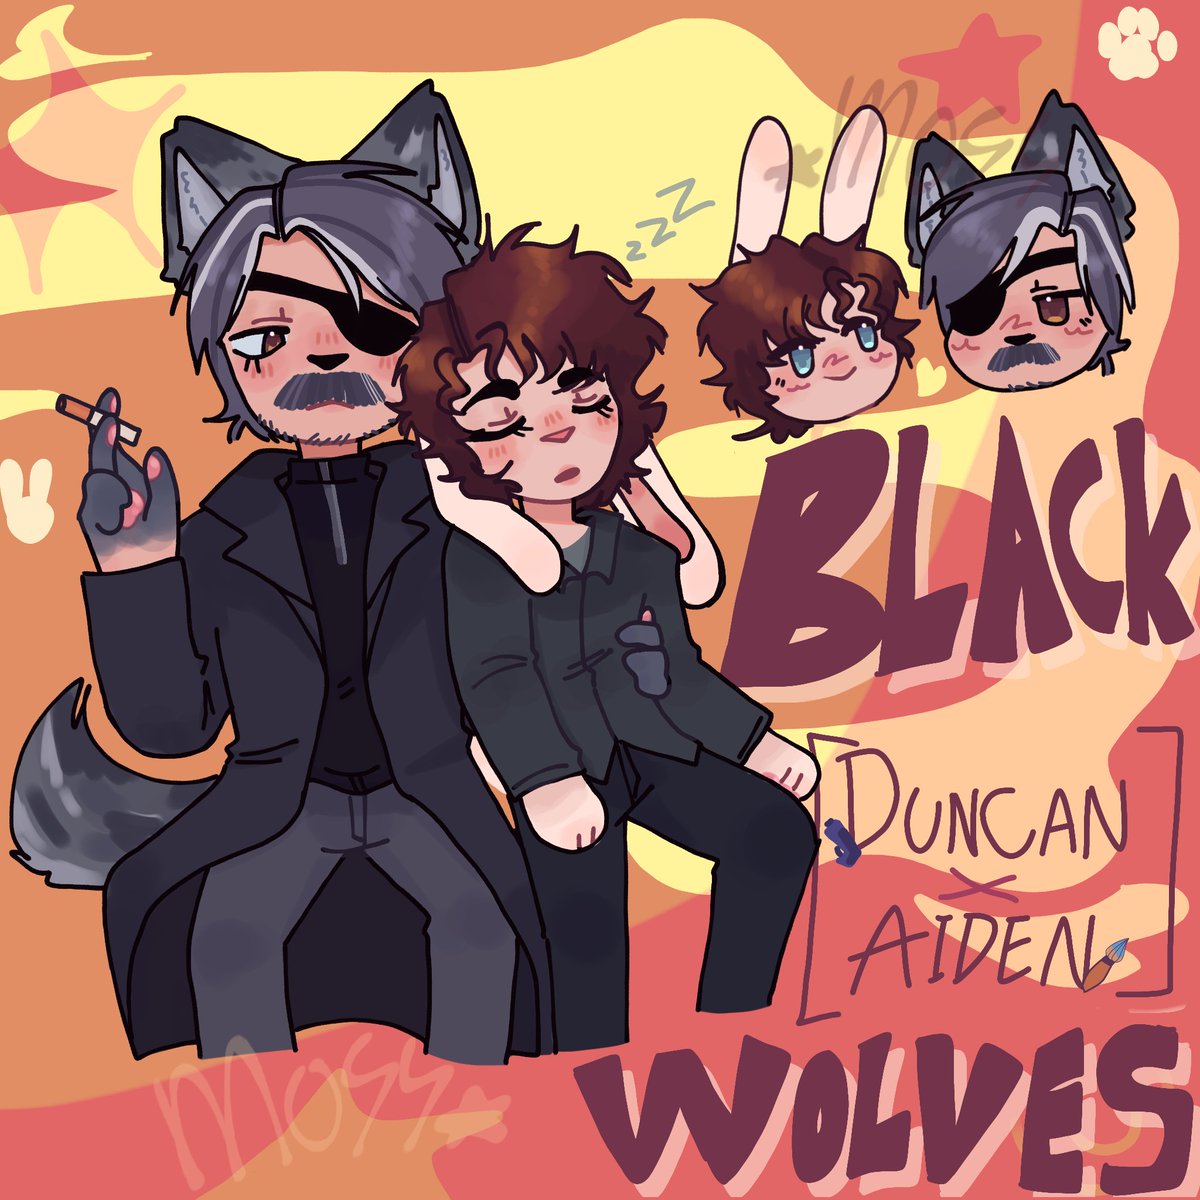 Chibi-ish #BlackWolves because i love them so much with a burning passion !! 🫶 (≧∇≦)

#heu